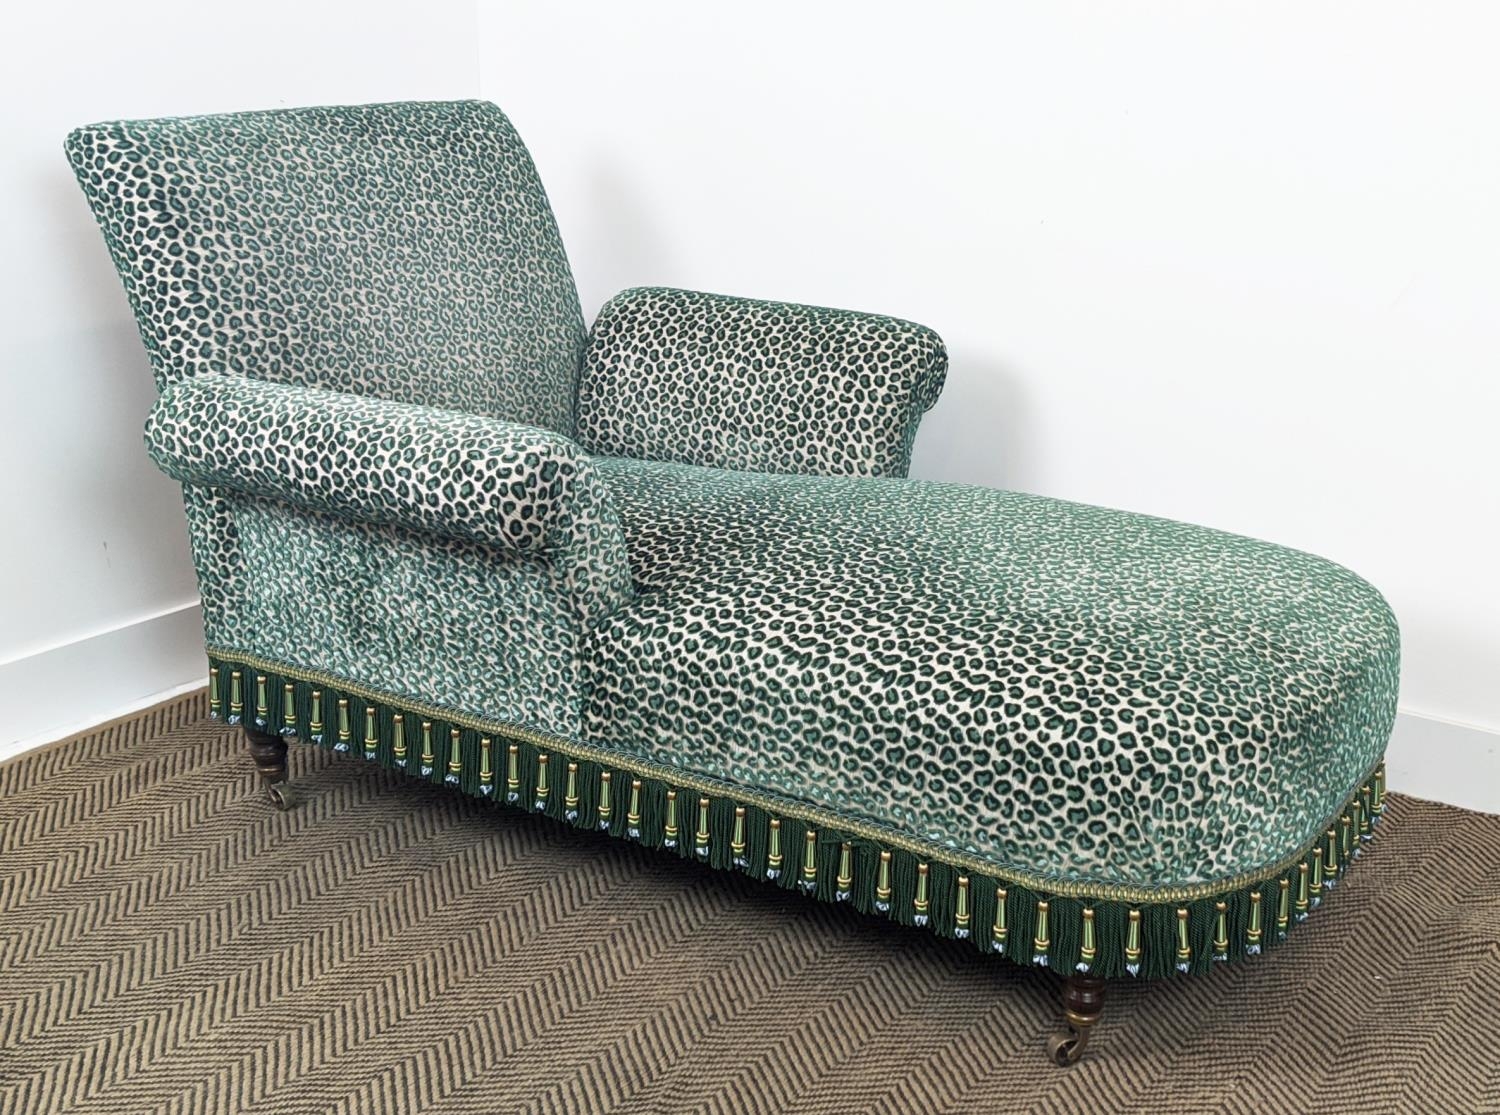 GEORGE SMITH BUTTERFLY CHAISE, leopard print cut velvet upholstery with bullion fringe, raised on